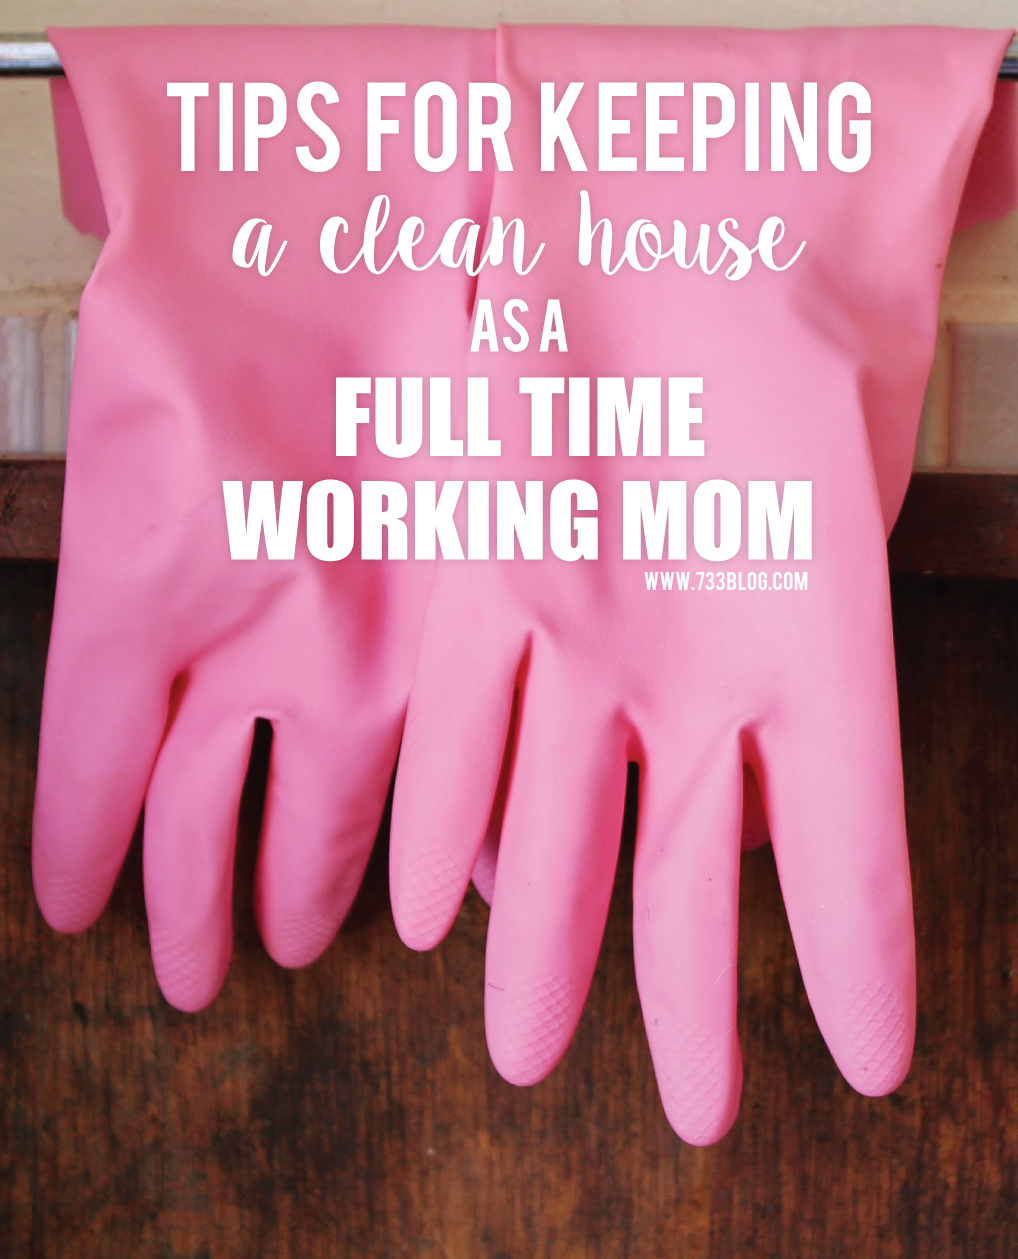 Tips for keeping a clean house as a full time working mom